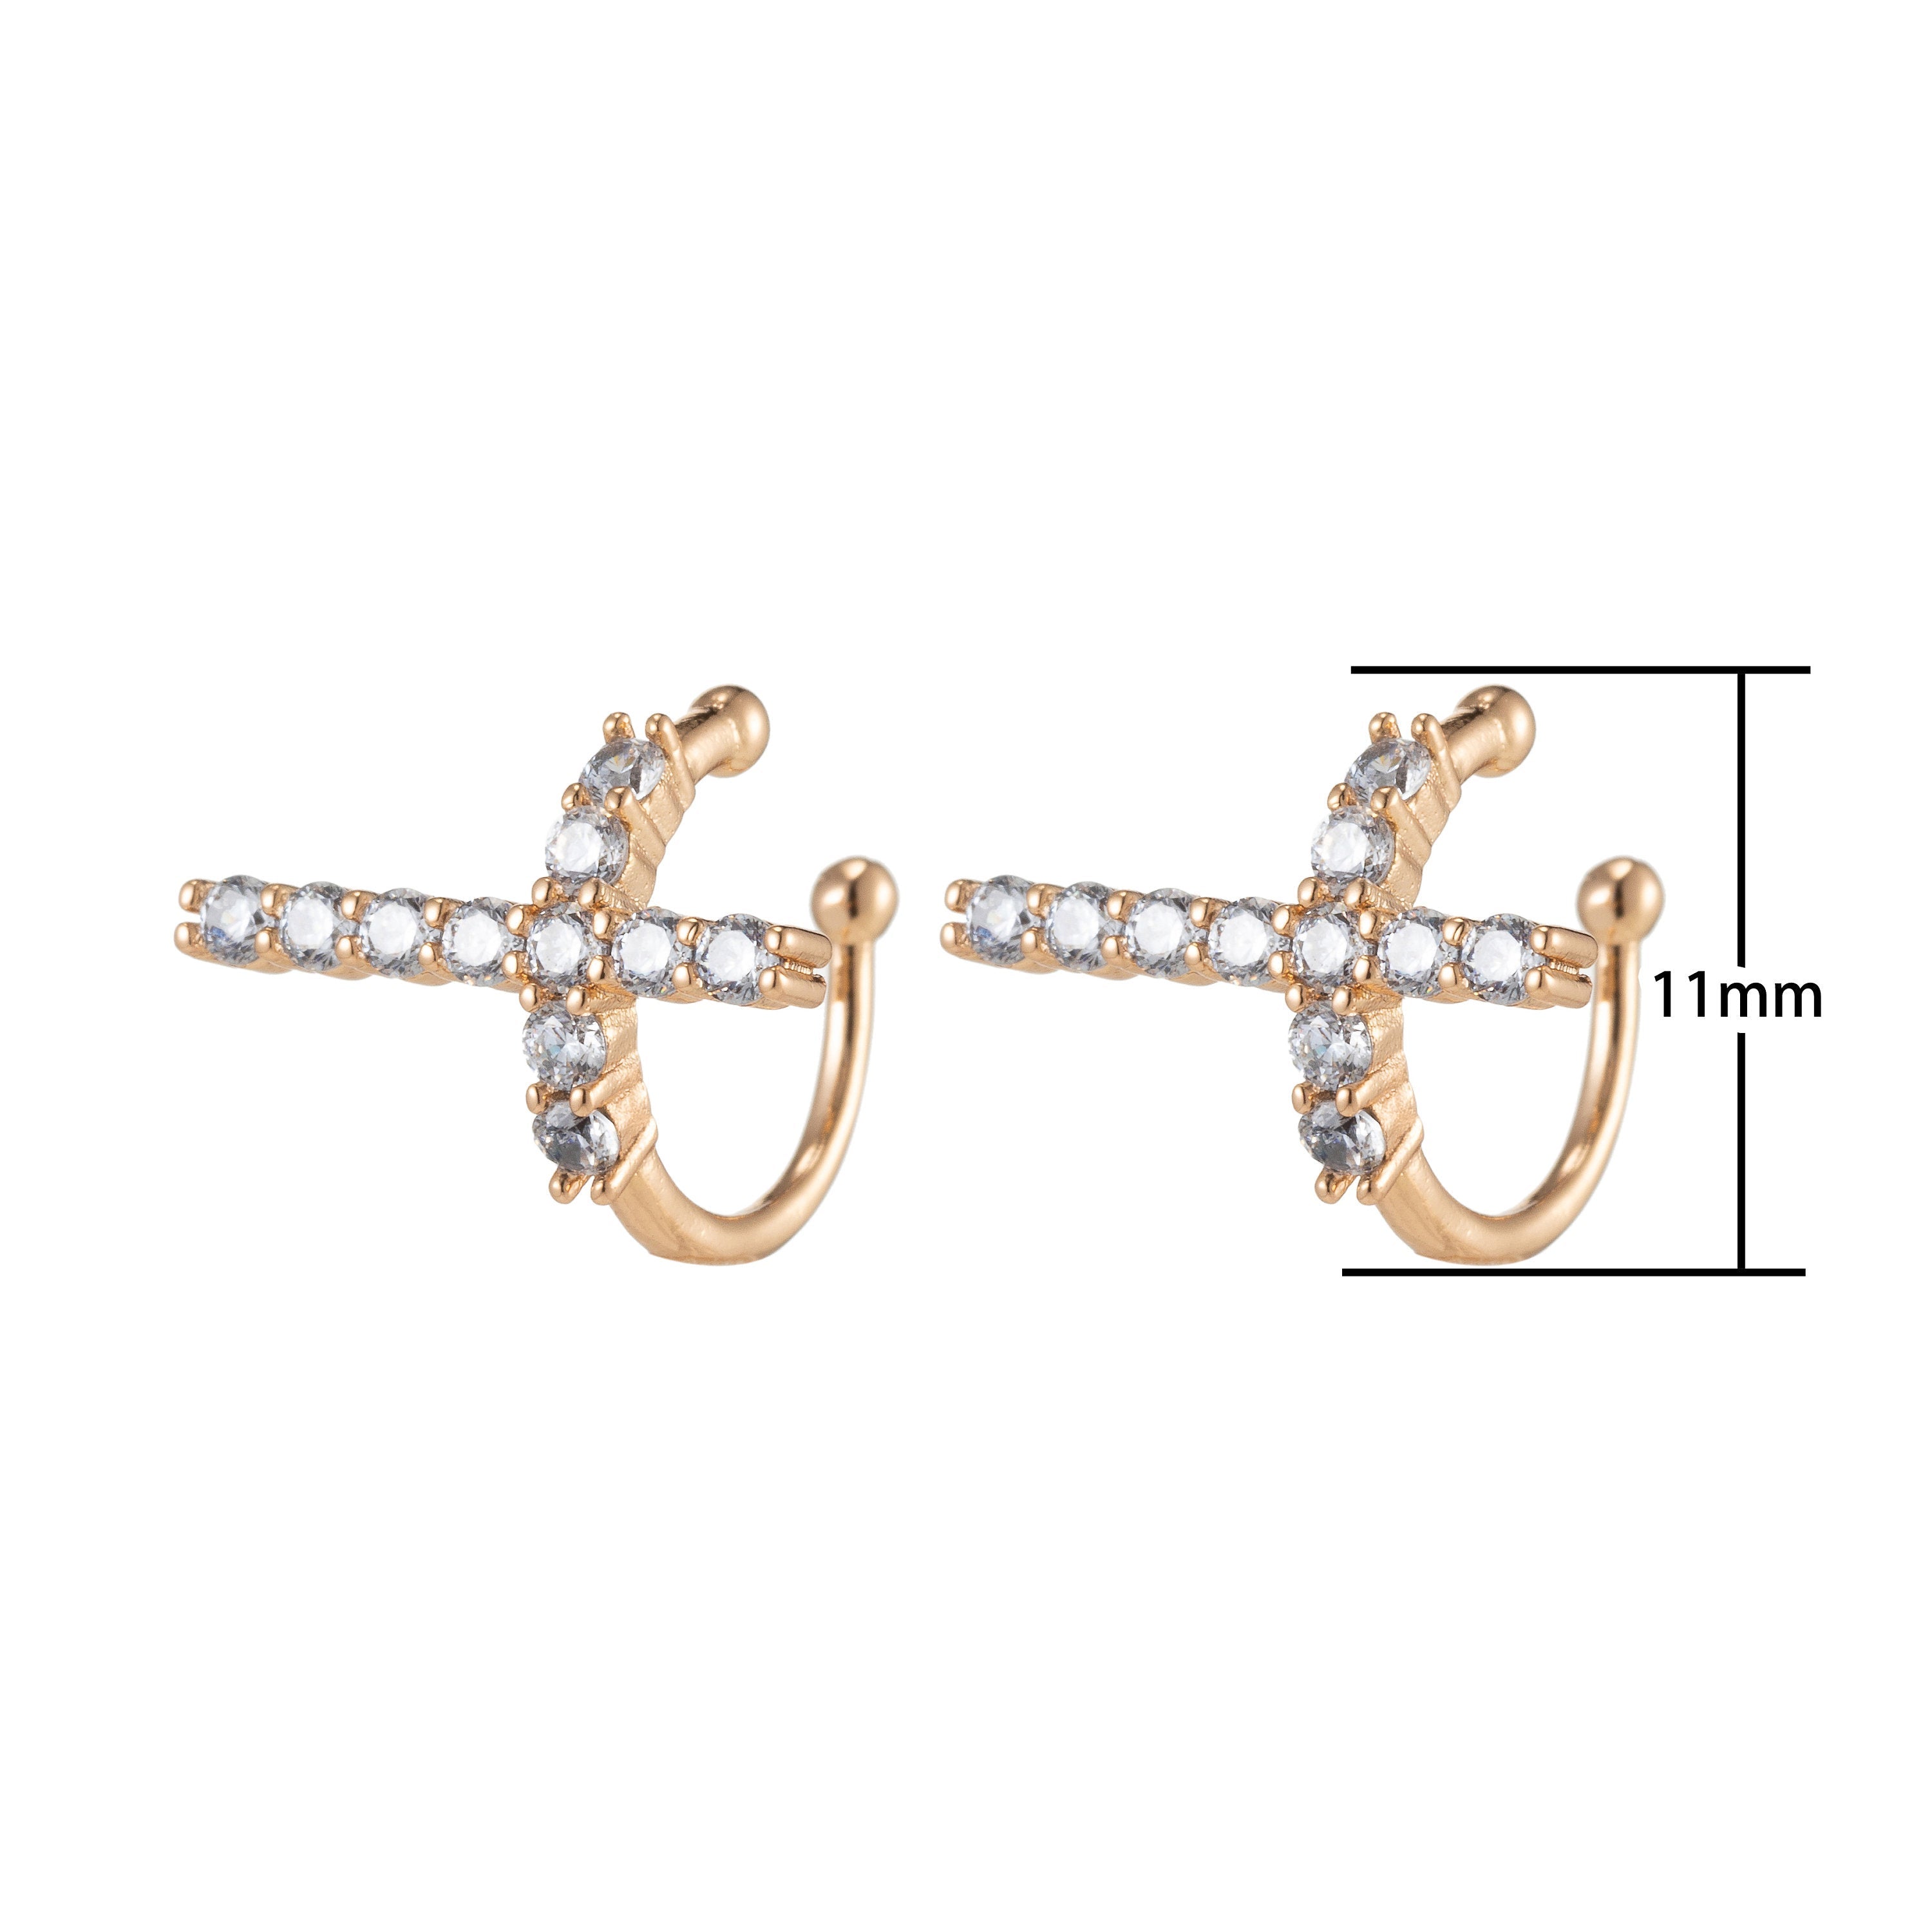 1x Dainty Cross Ear Cuffs for Non Pierced Ears Micro Pave Crystal Gold Clip on Conch Cuff Earrings for Women Girls - DLUXCA